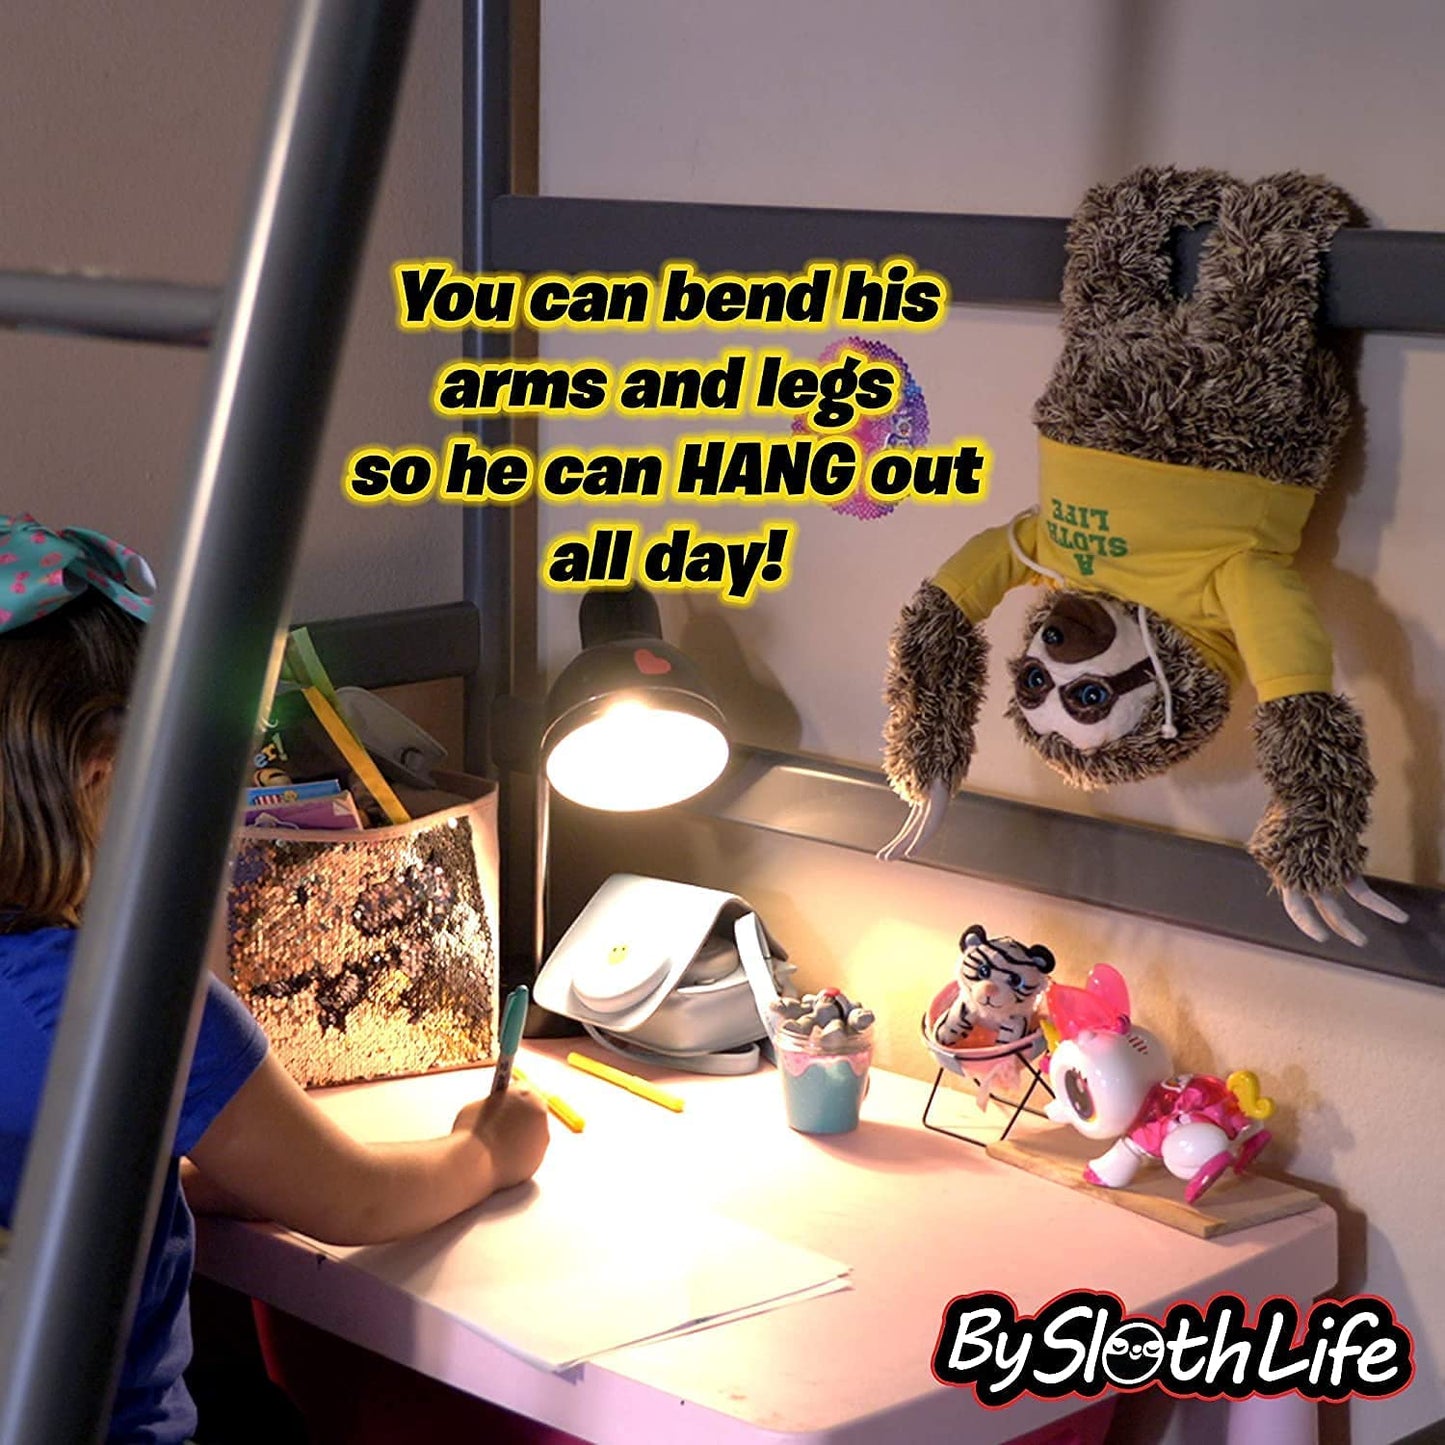 A sloth plush toy hanging upside down in a child's room. There is text which reads, 'You can bend his arms and legs so he can hang out all day.'